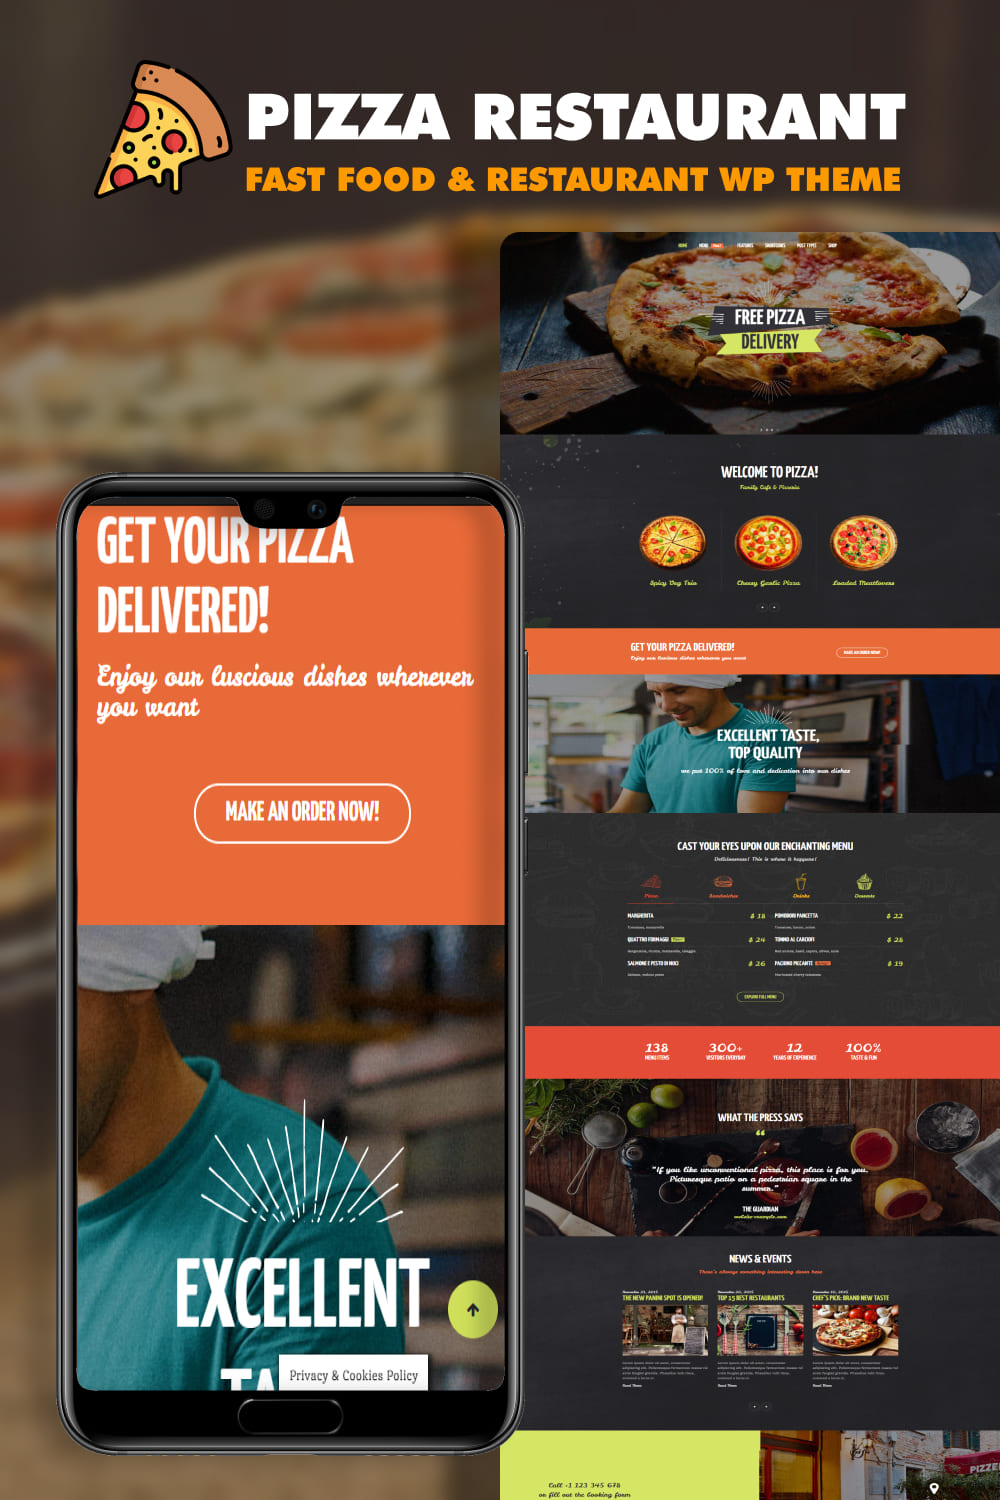 Page image of amazing fast food and pizzeria theme wordpress template.